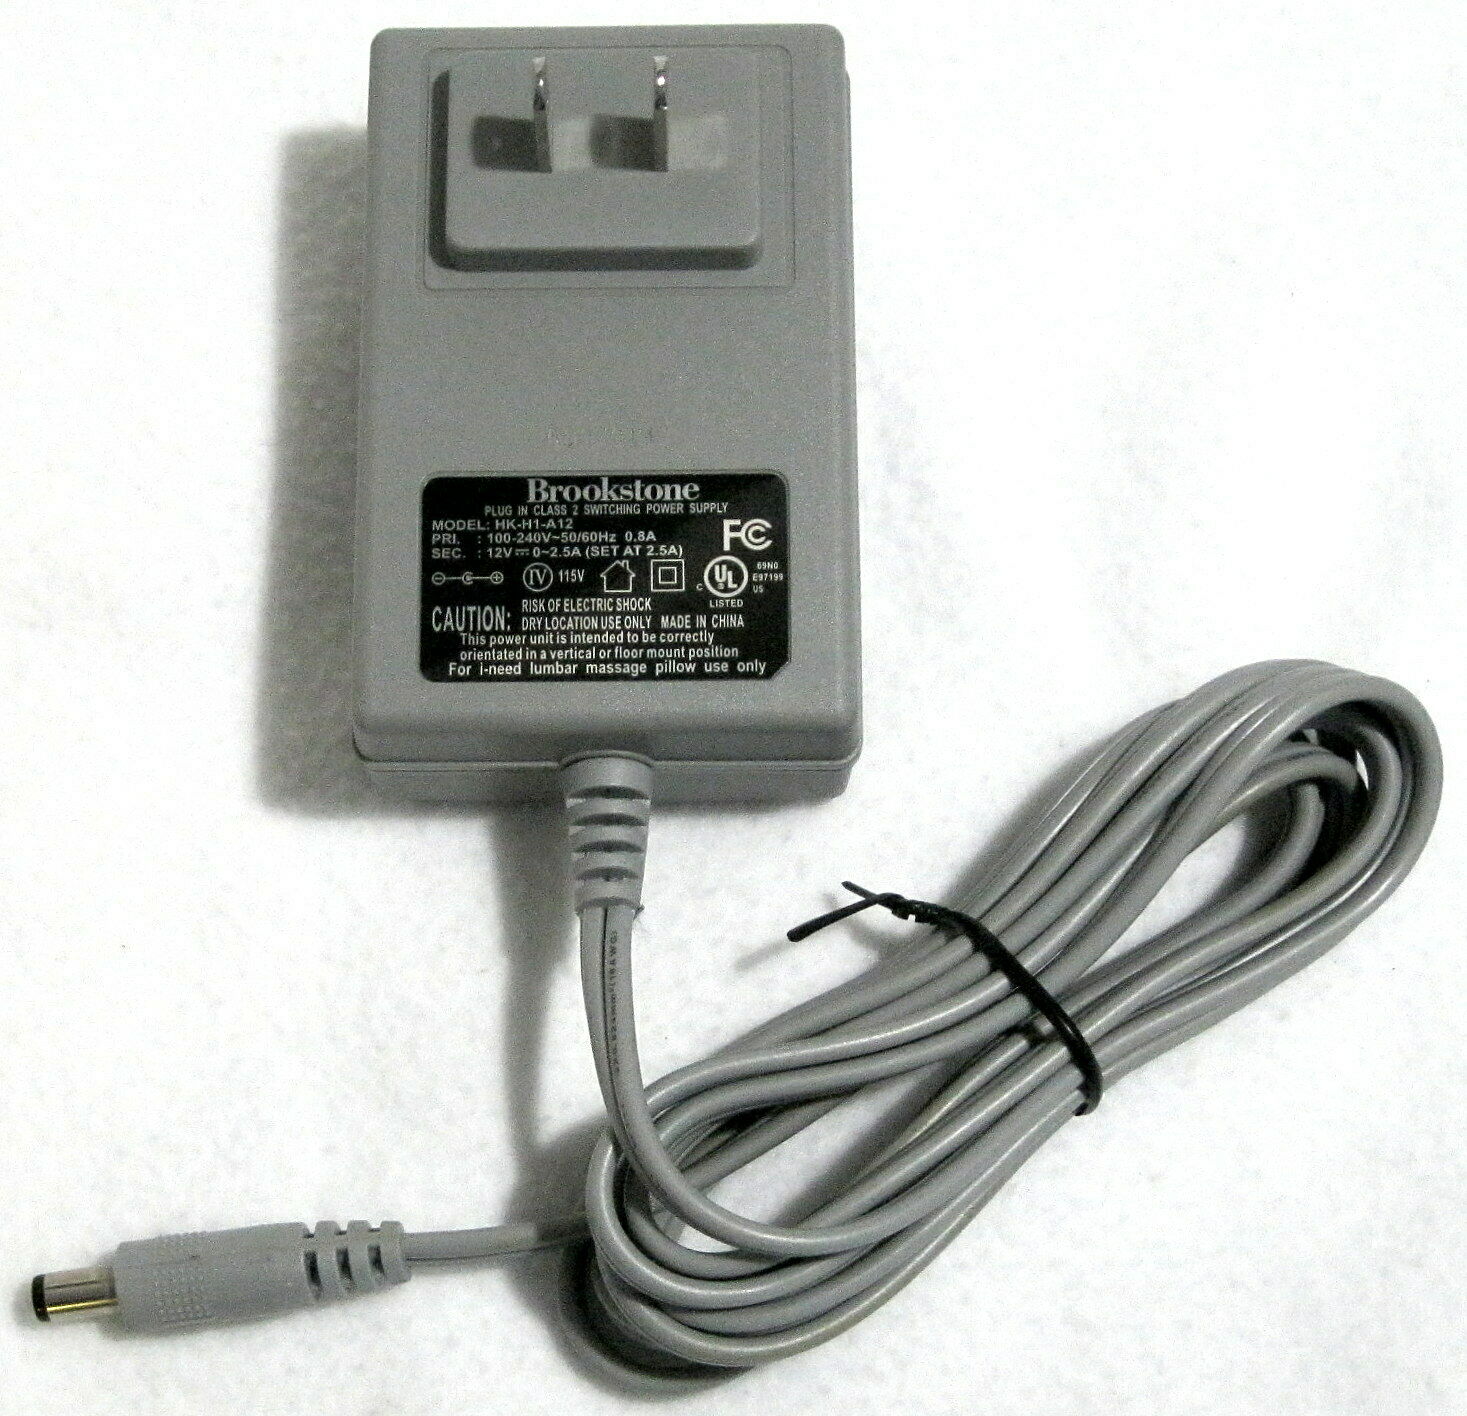 NEW 12V 0-2.5A Brookstone HK-H1-A12 Power Supply AC DC Adapter